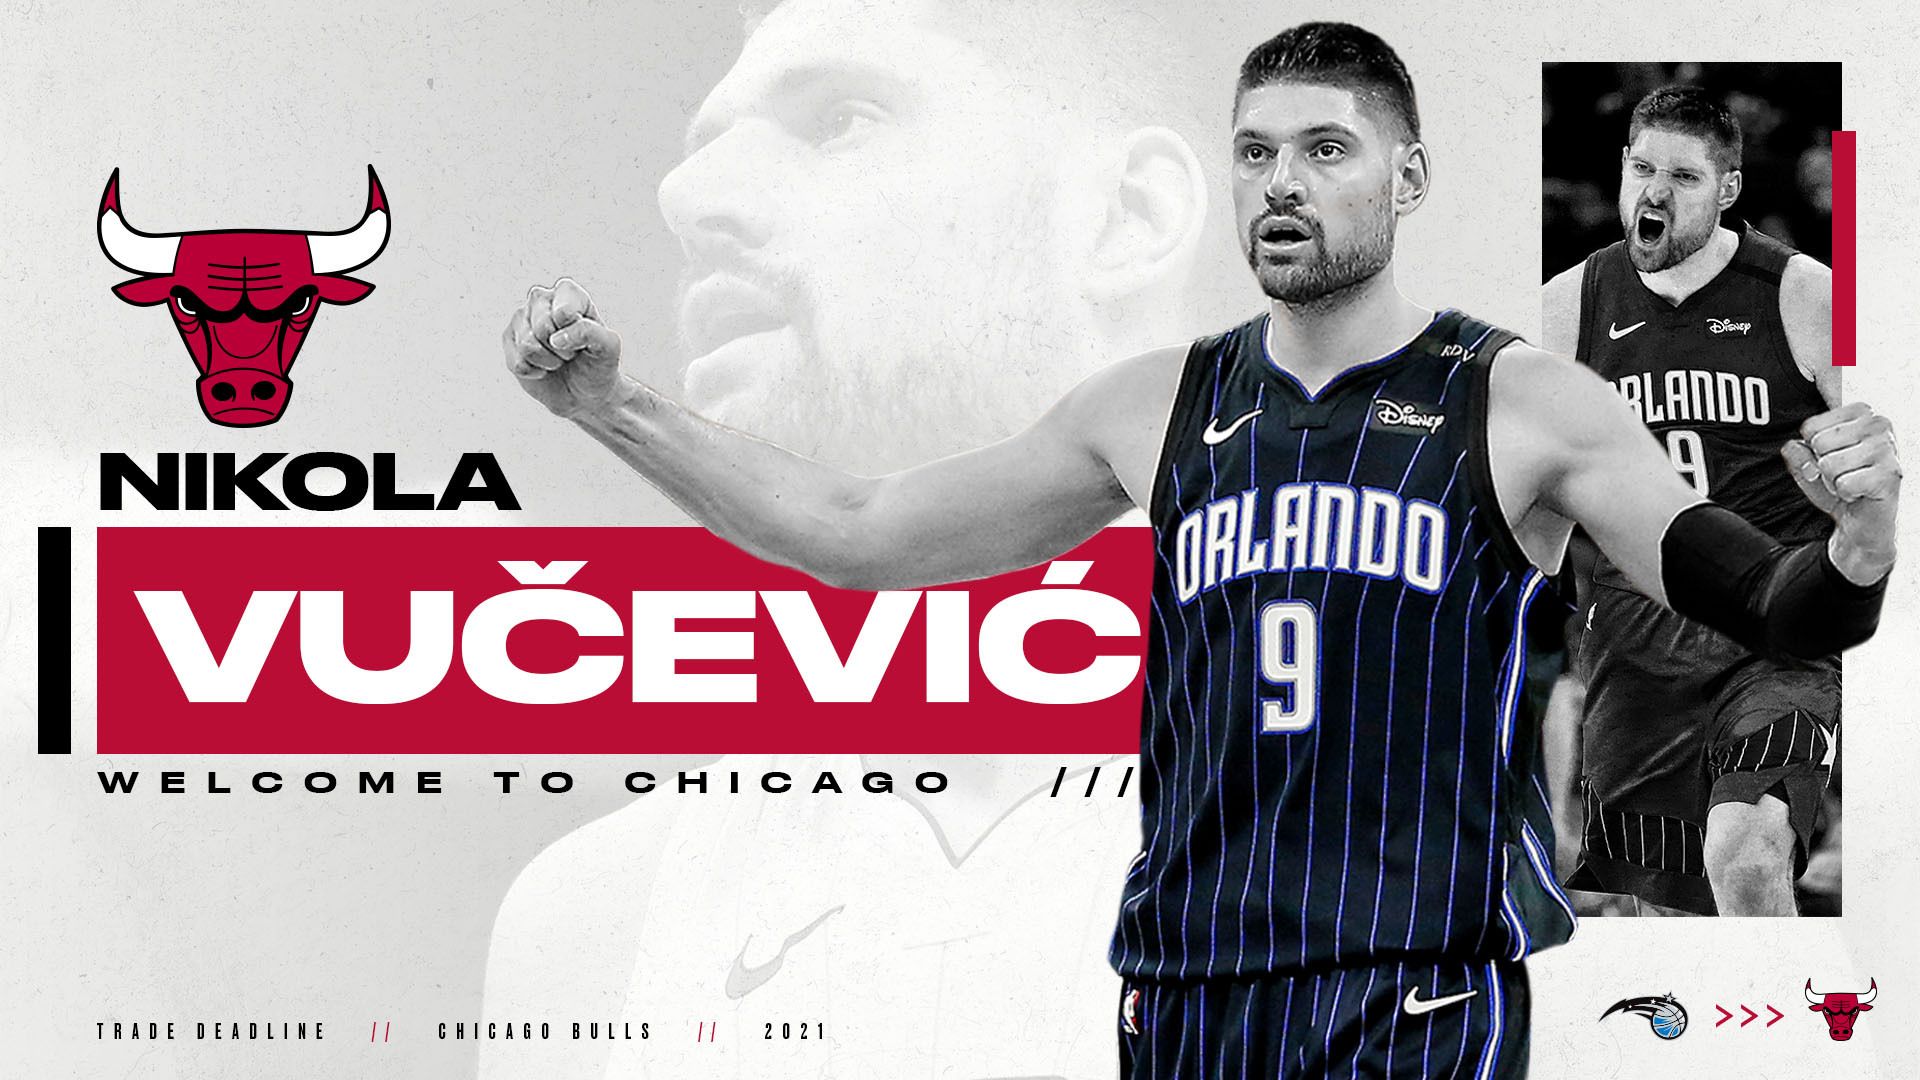 Nikola Vucevic you! Excited to be part of the Bulls family!